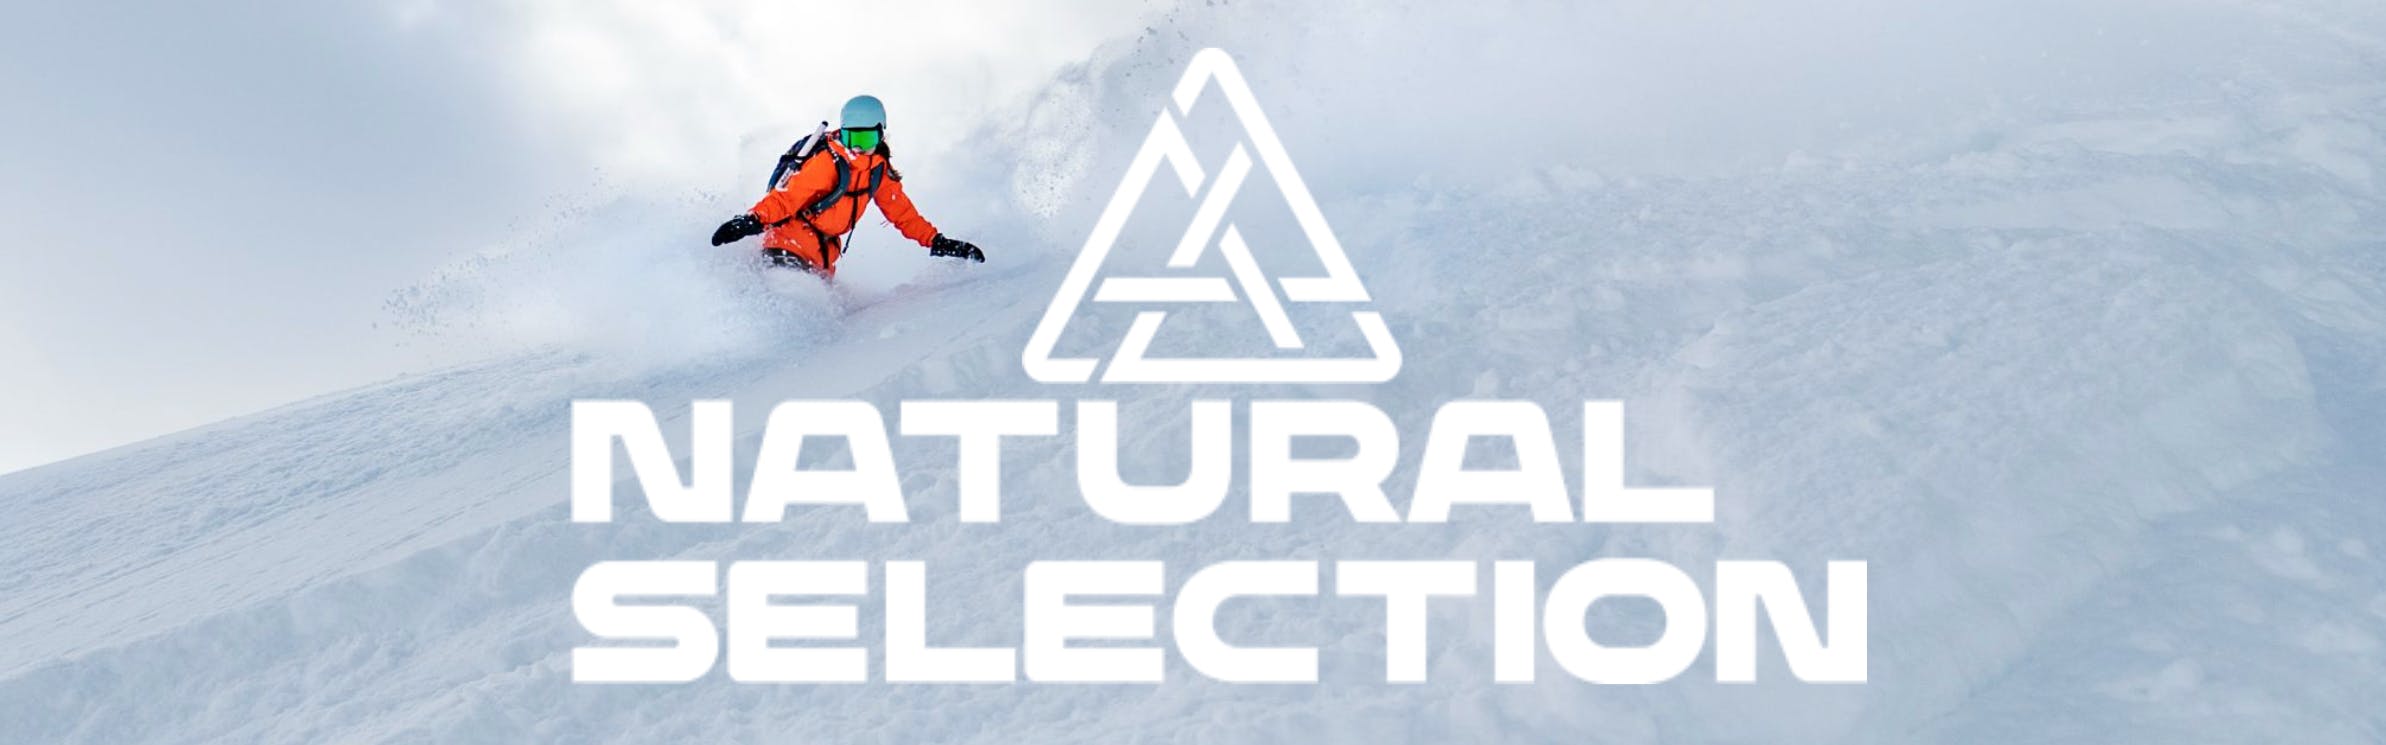 A snowboarder in orange rides downhill next to the Natural Selection logo.